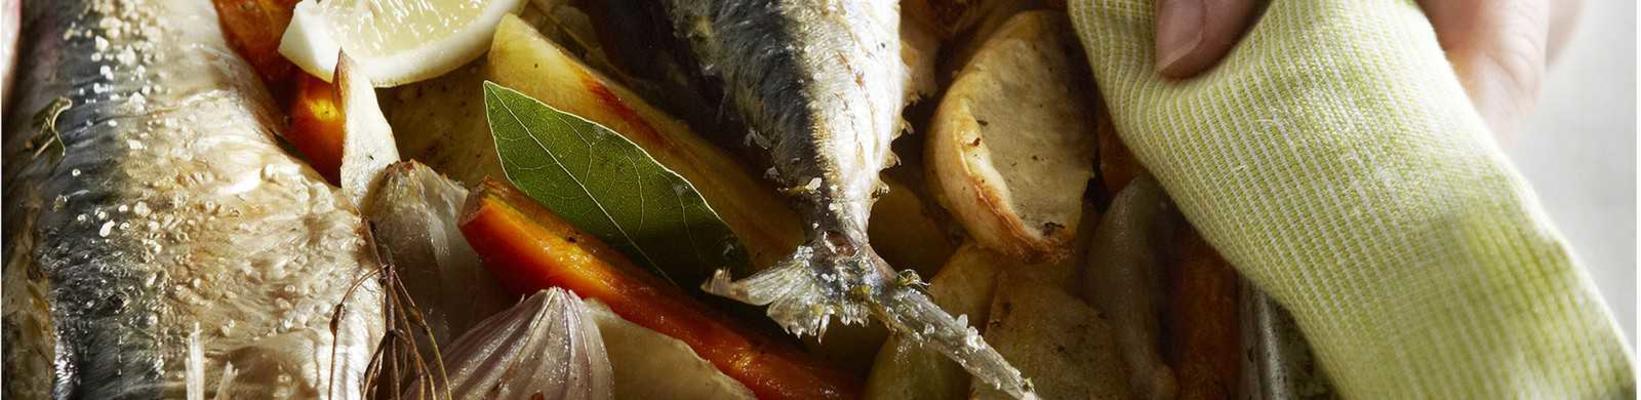 oven-baked mackerel with winter carrot and laurel